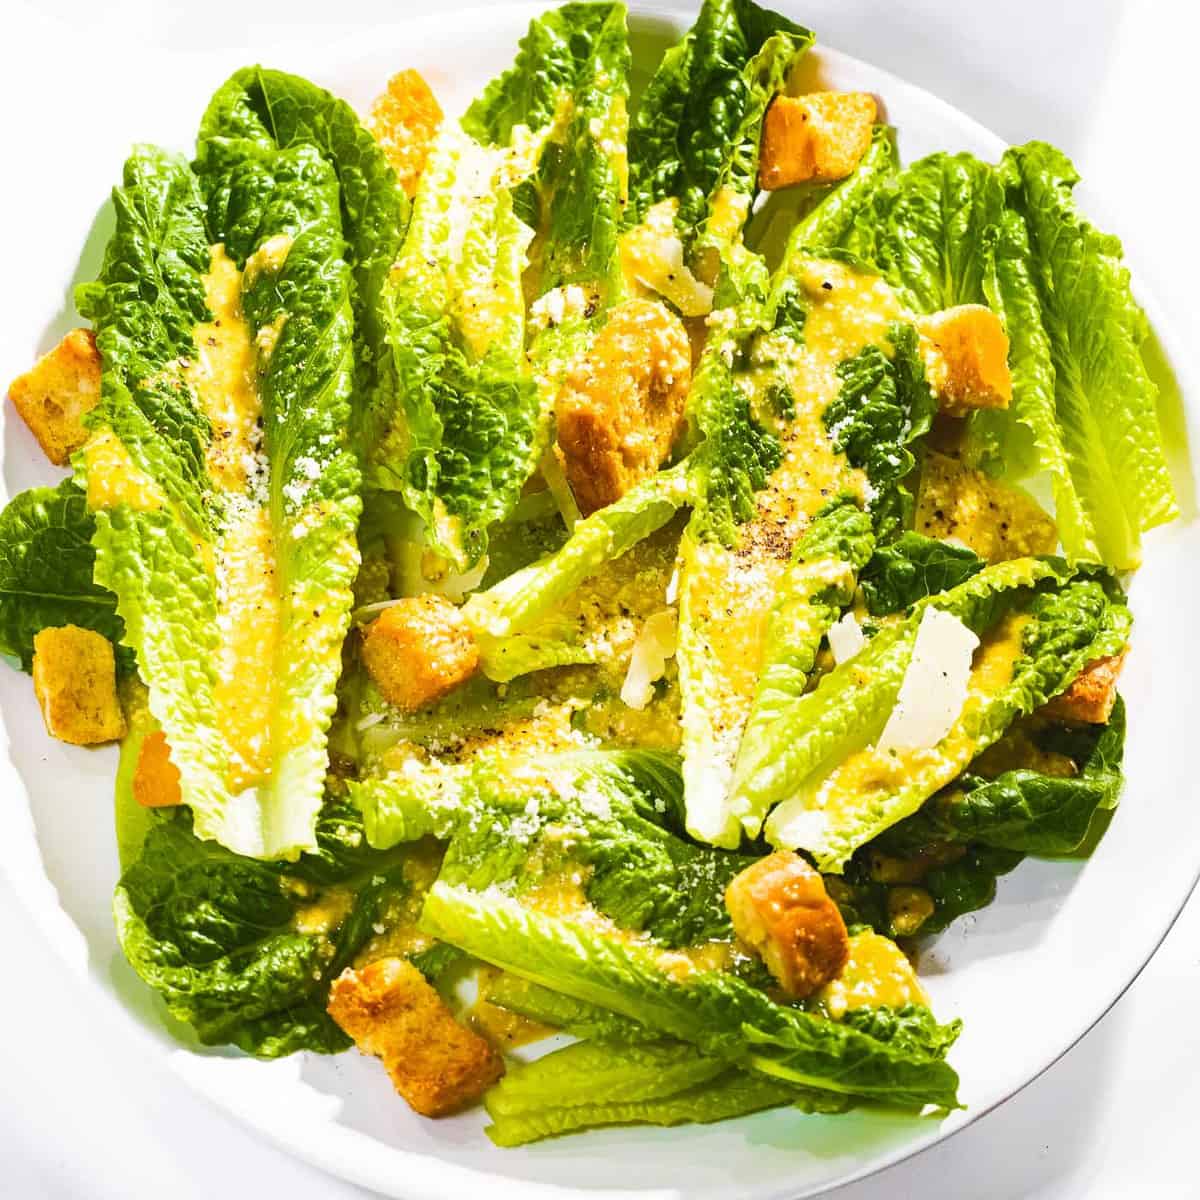 Caesar salad with romaine lettuce, croutons, and homemade dressing.